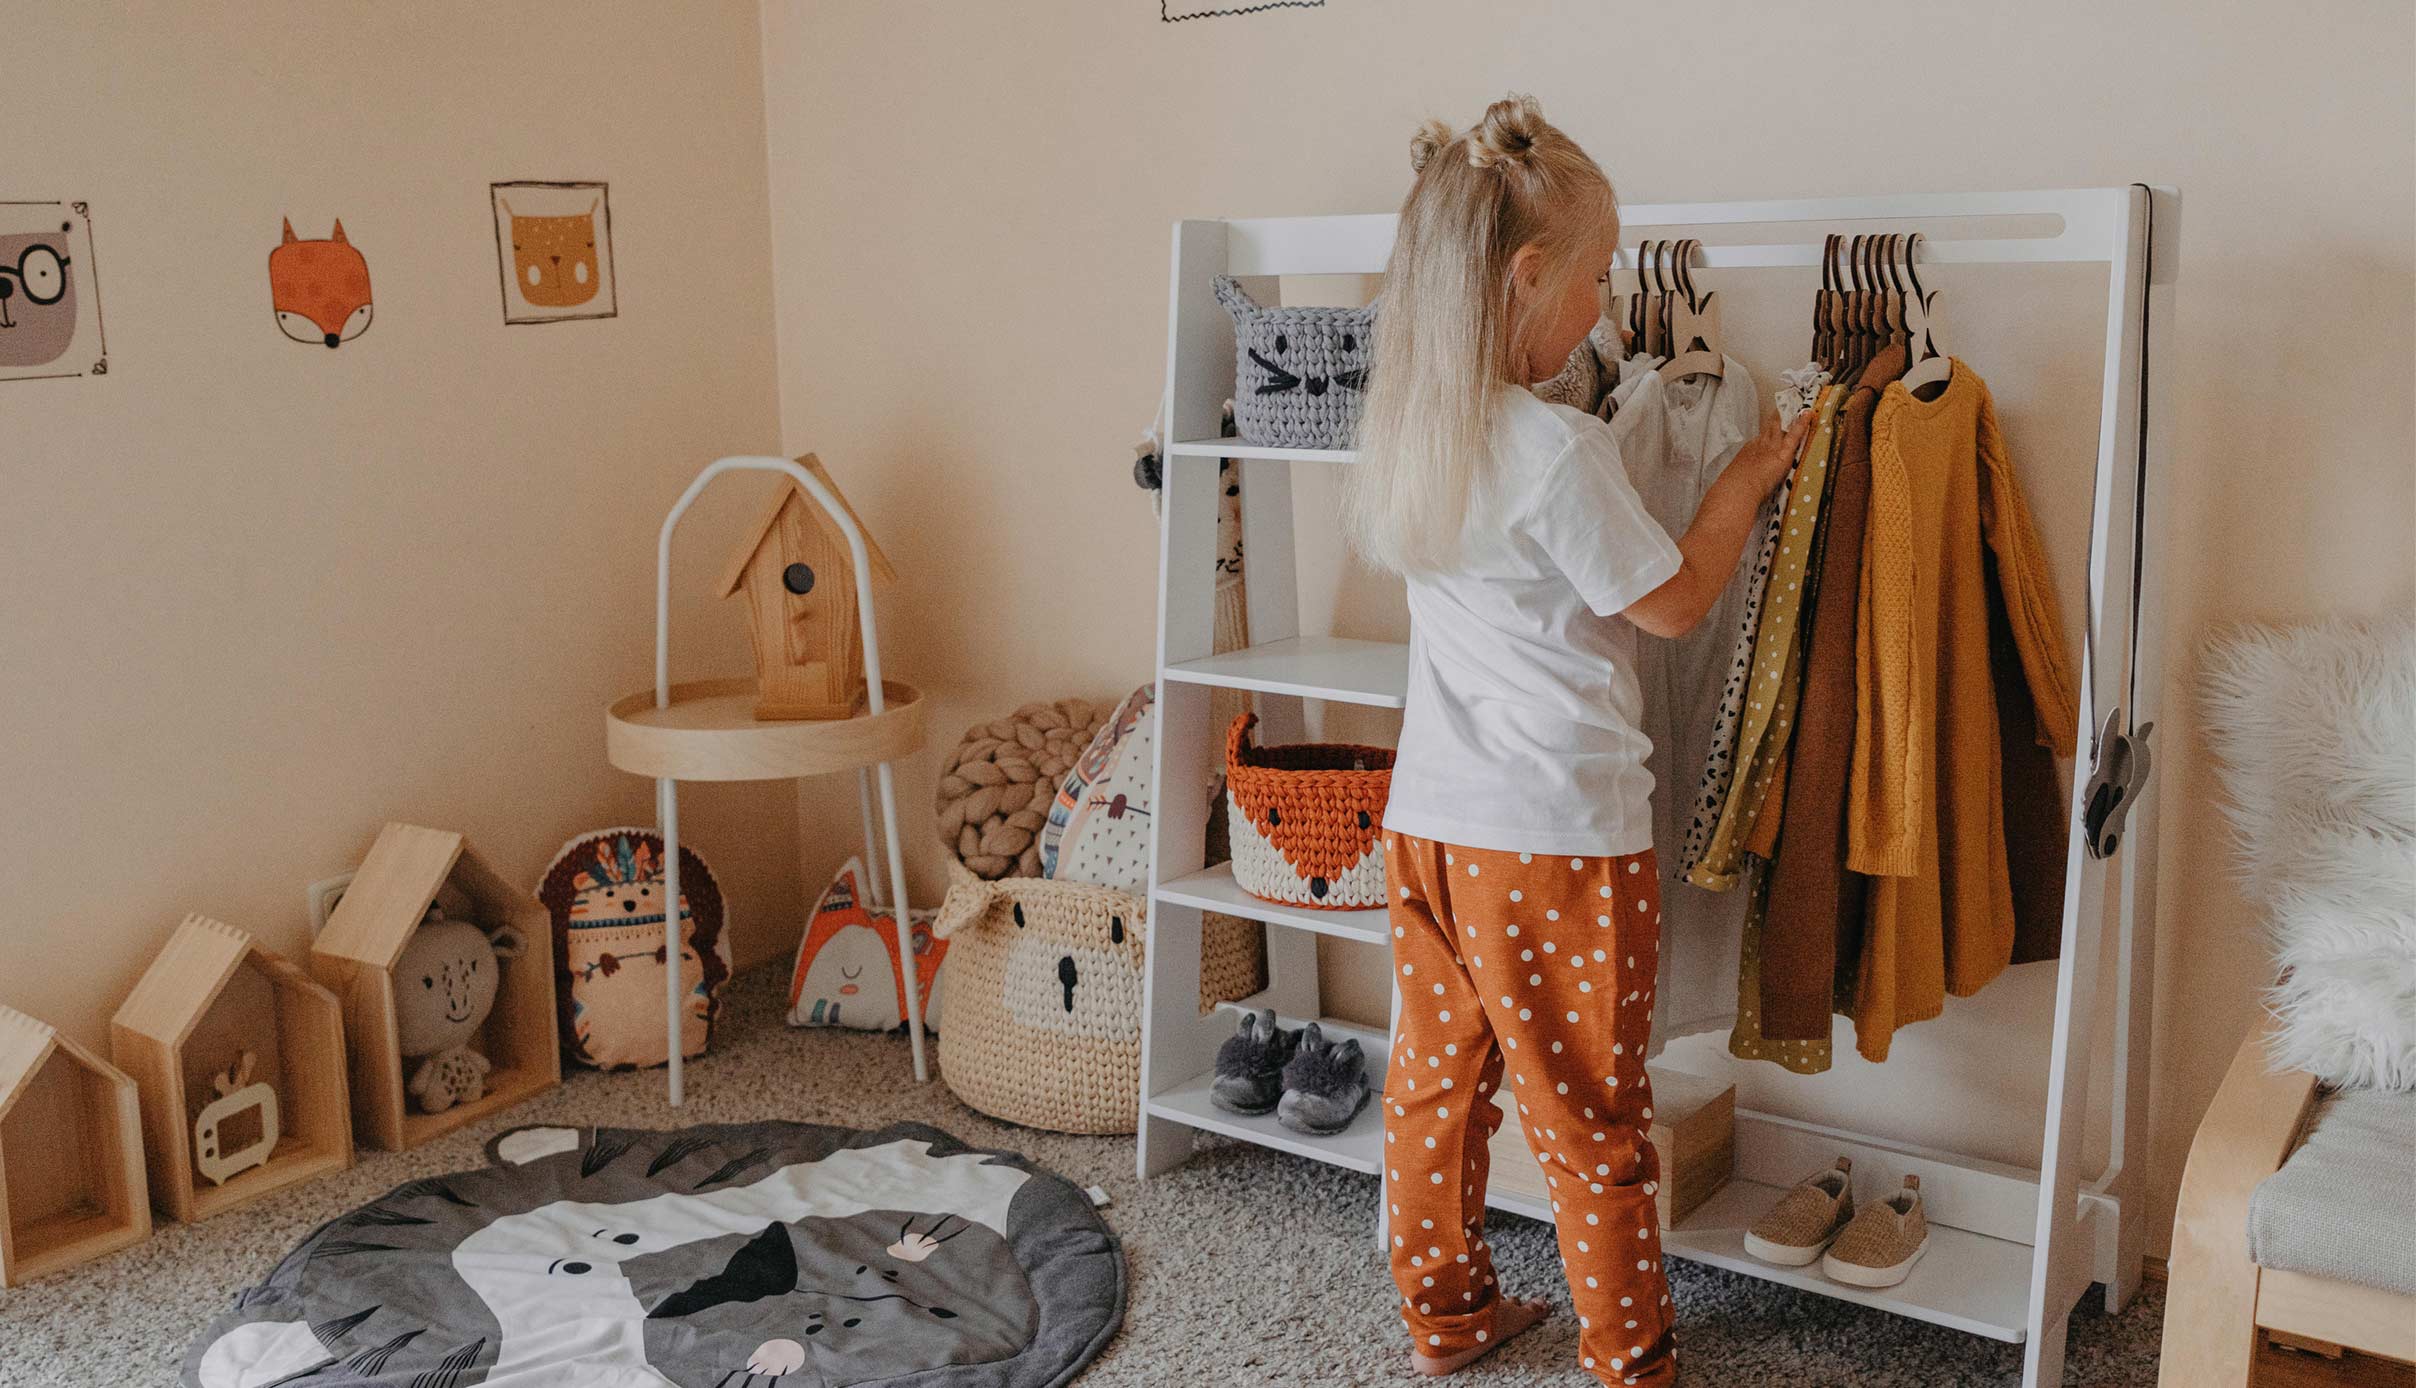 A little girl standing in front of a shelf in a child's room.